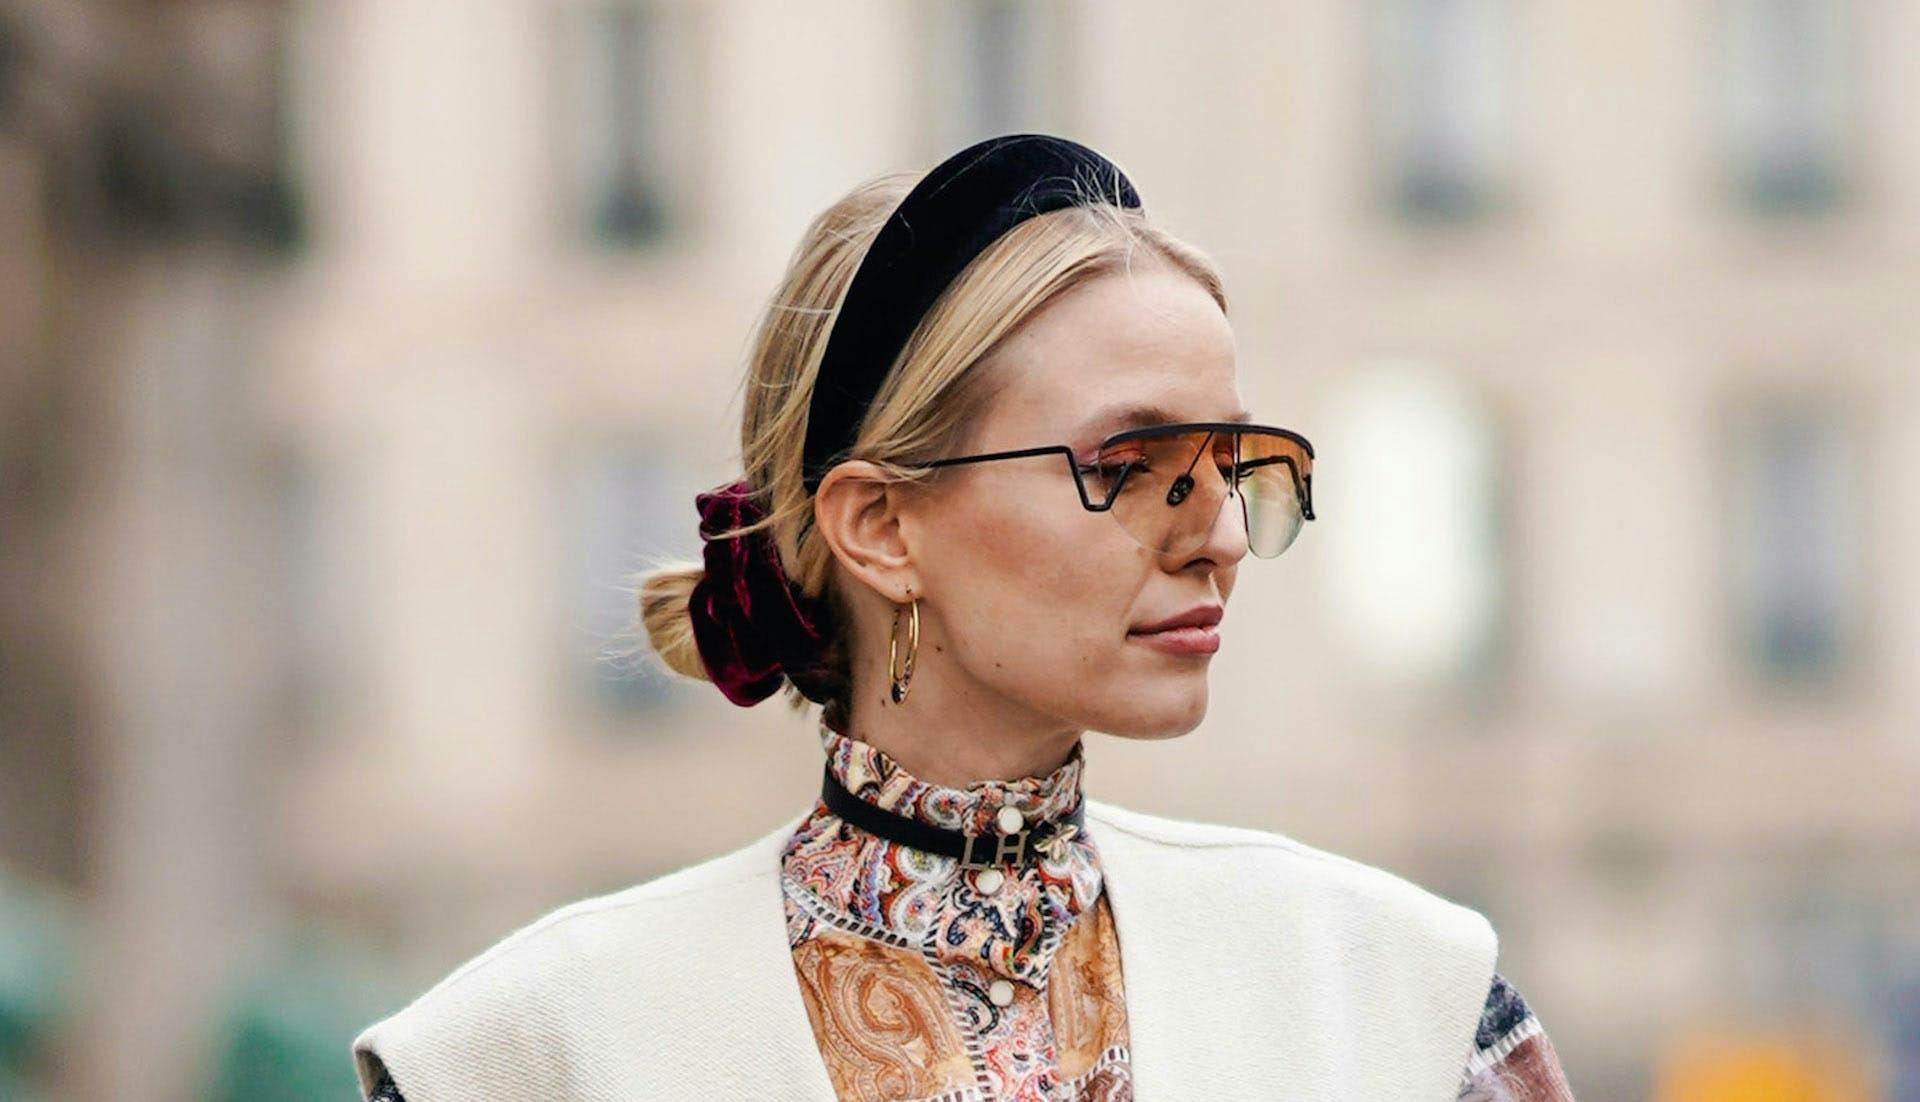 arts culture and entertainment,celebrities,fashion,street style paris apparel clothing human person glasses accessories necklace jewelry hat headband